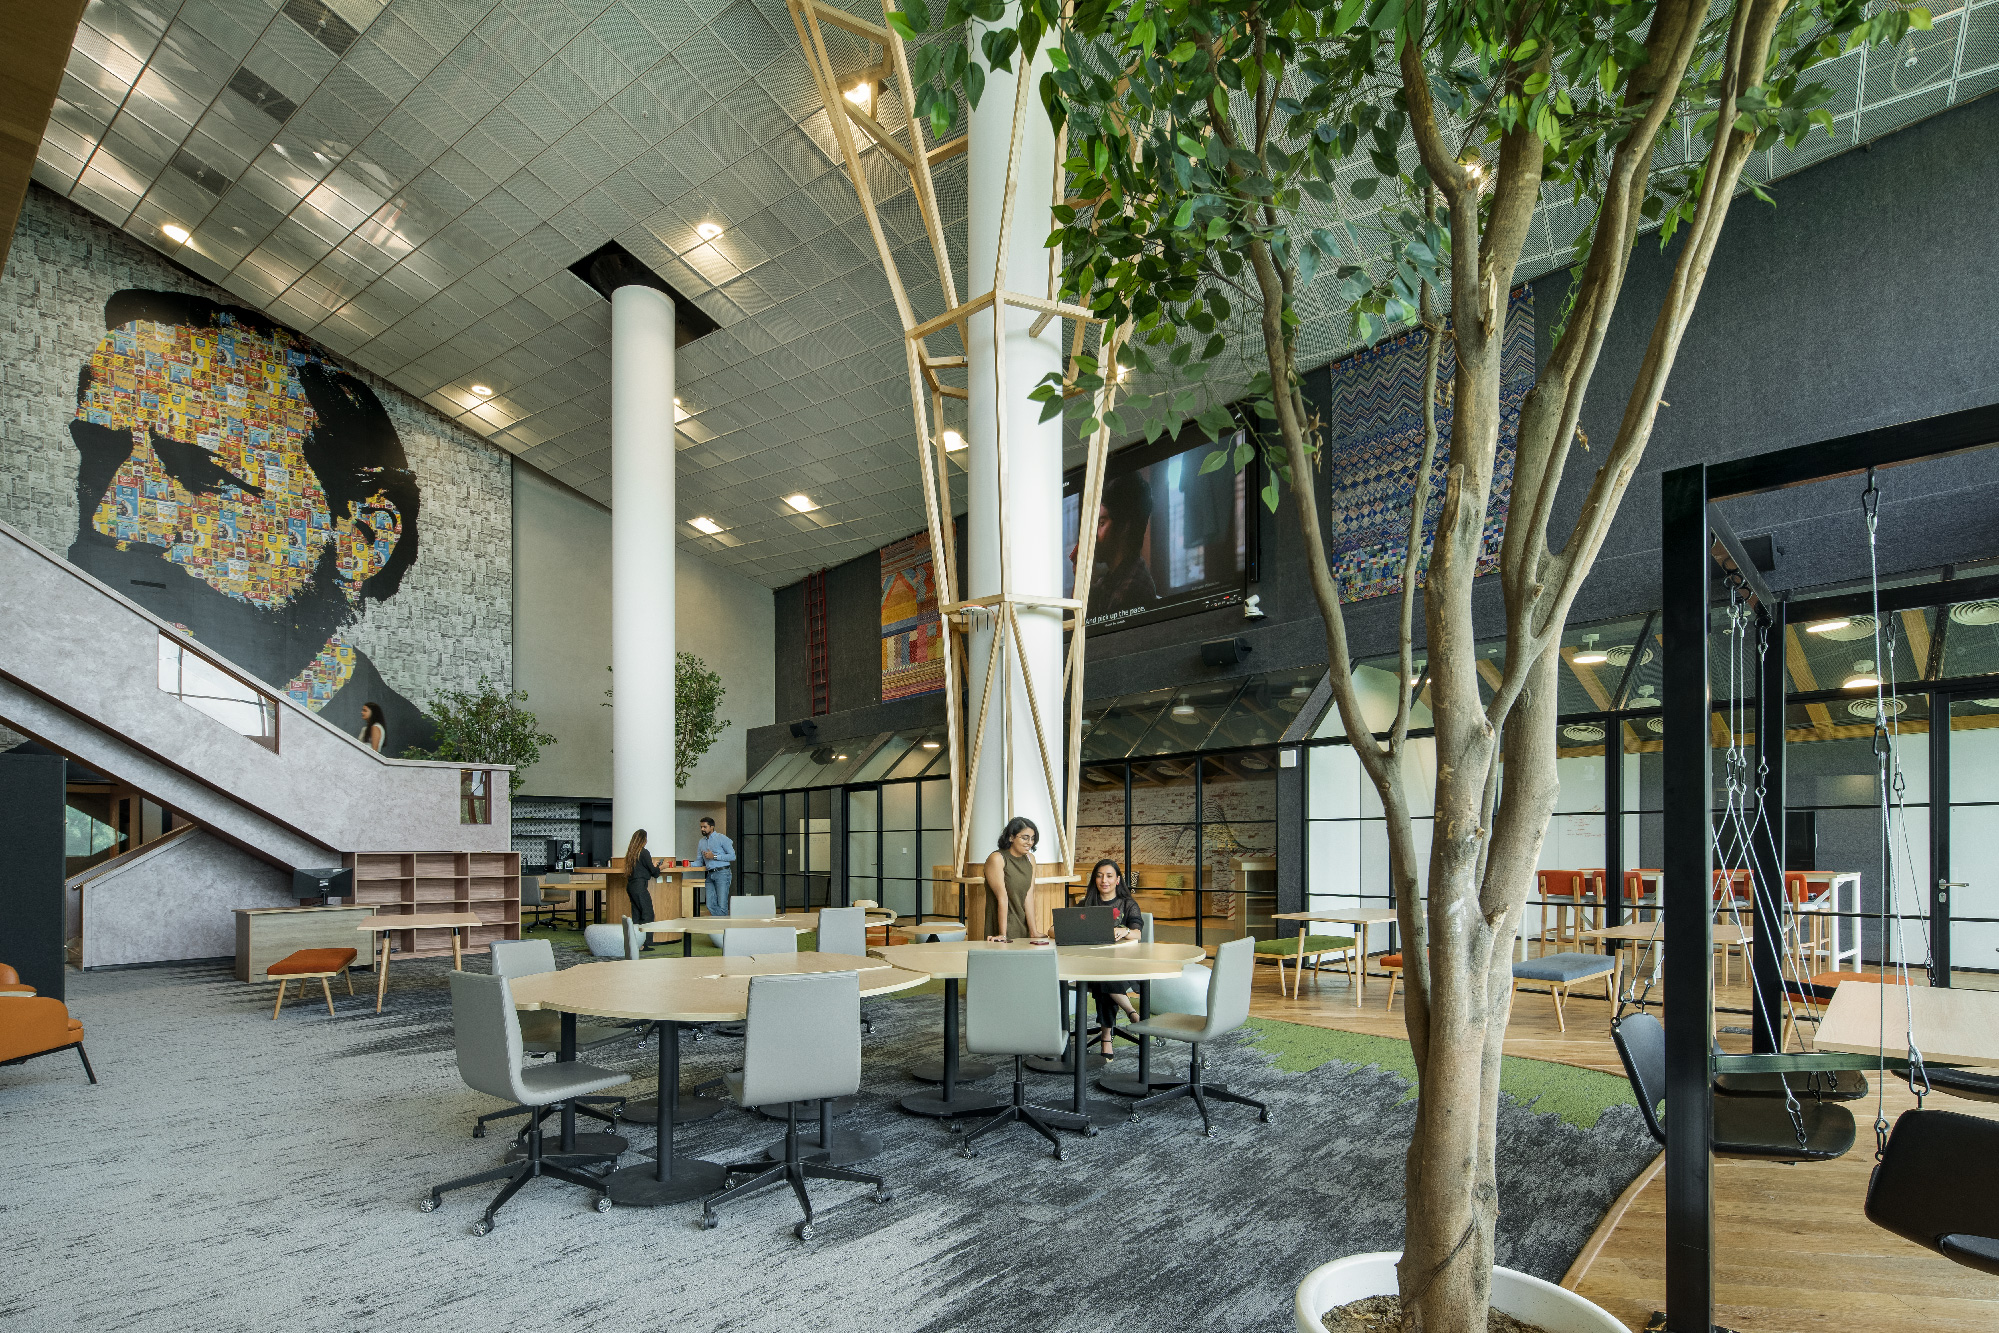 Nestle office interiors promoting biophilia with natural elements and ample sunlight in Gurugram.